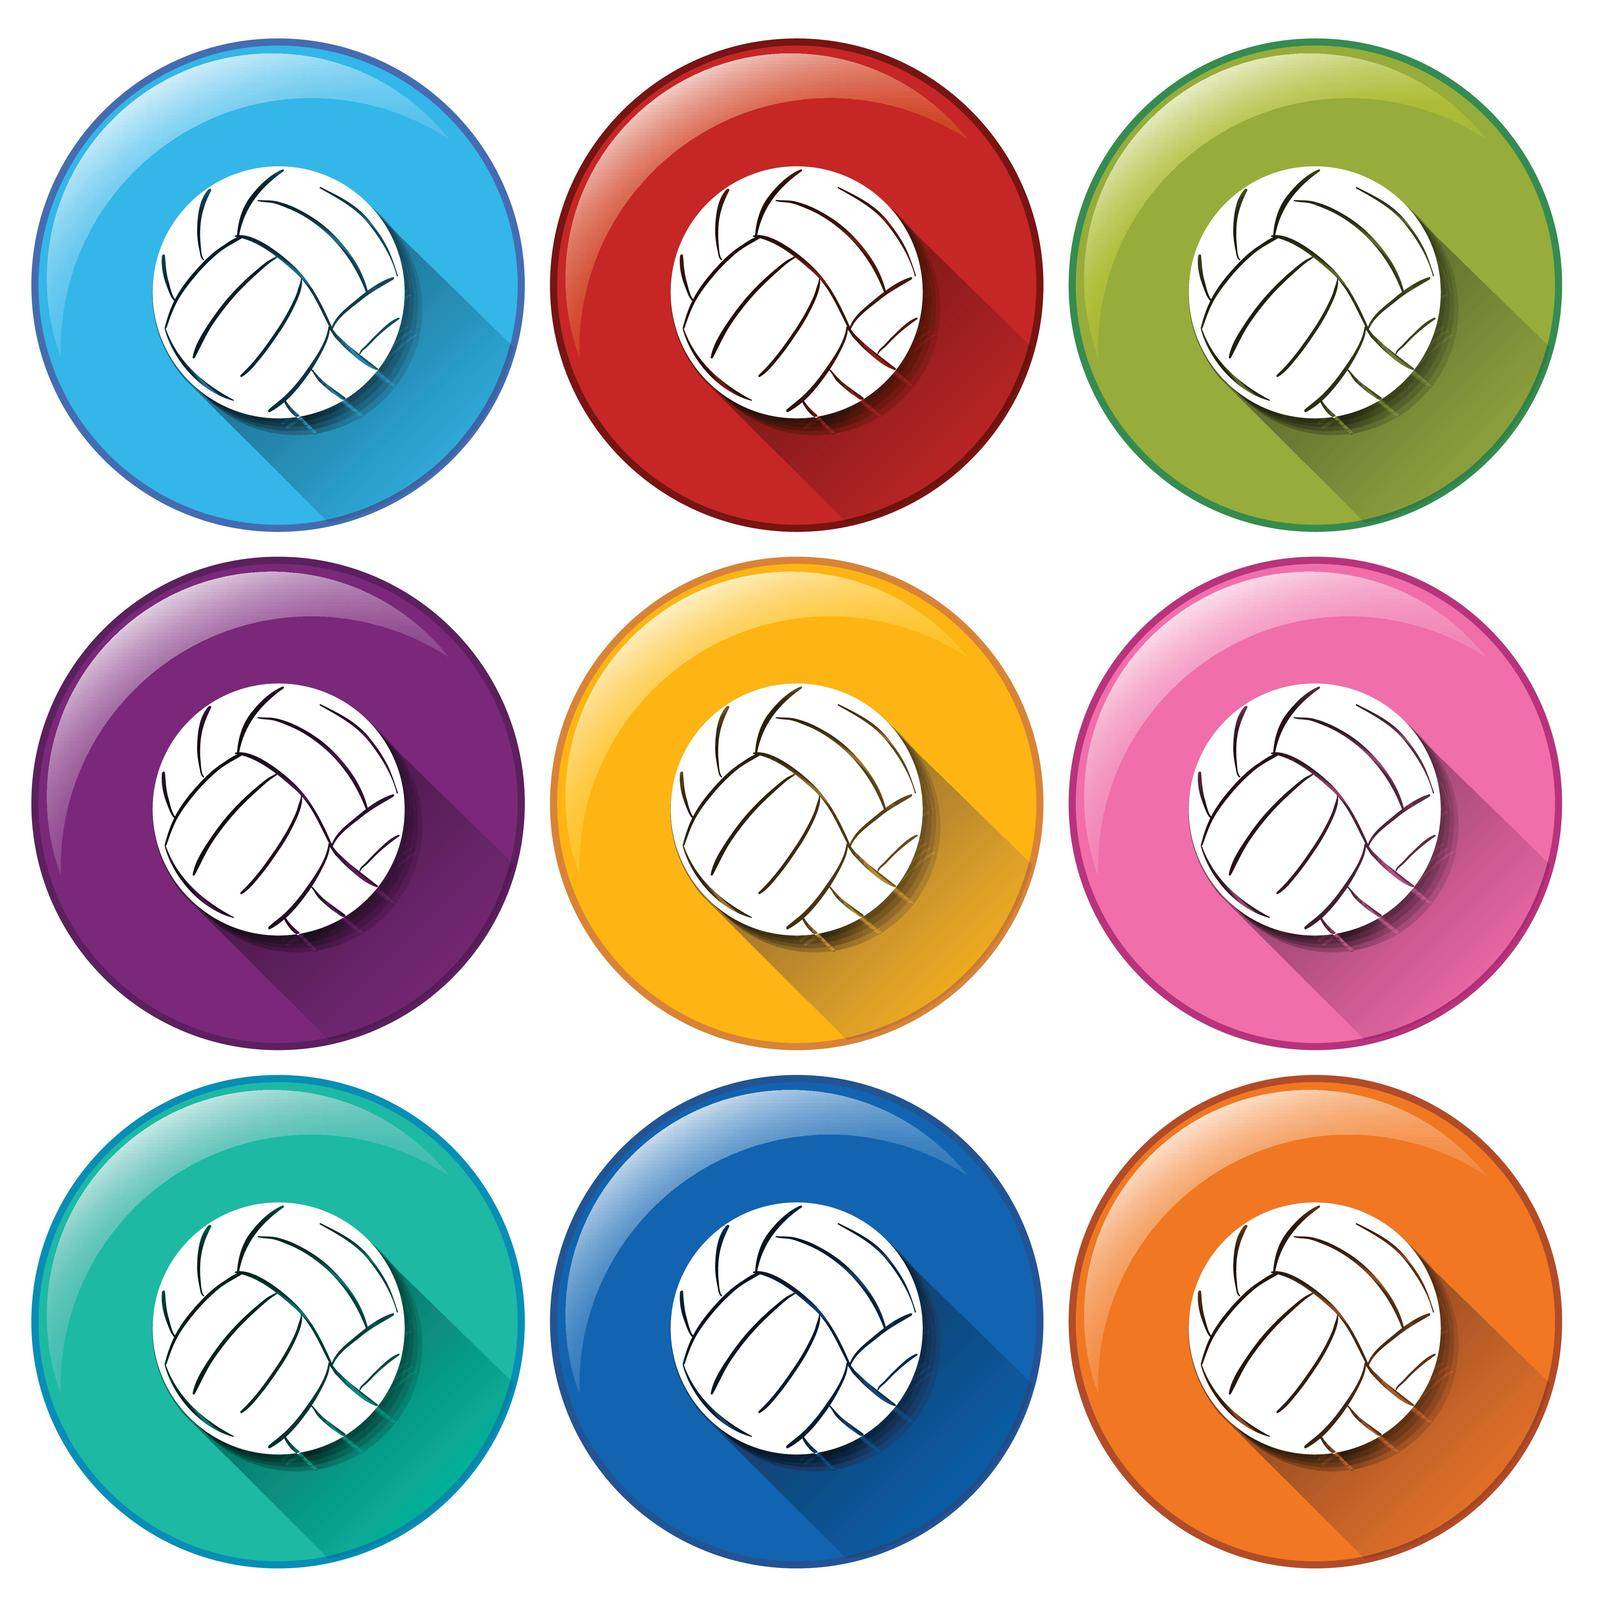 Illustration of the buttons with balls on a white background